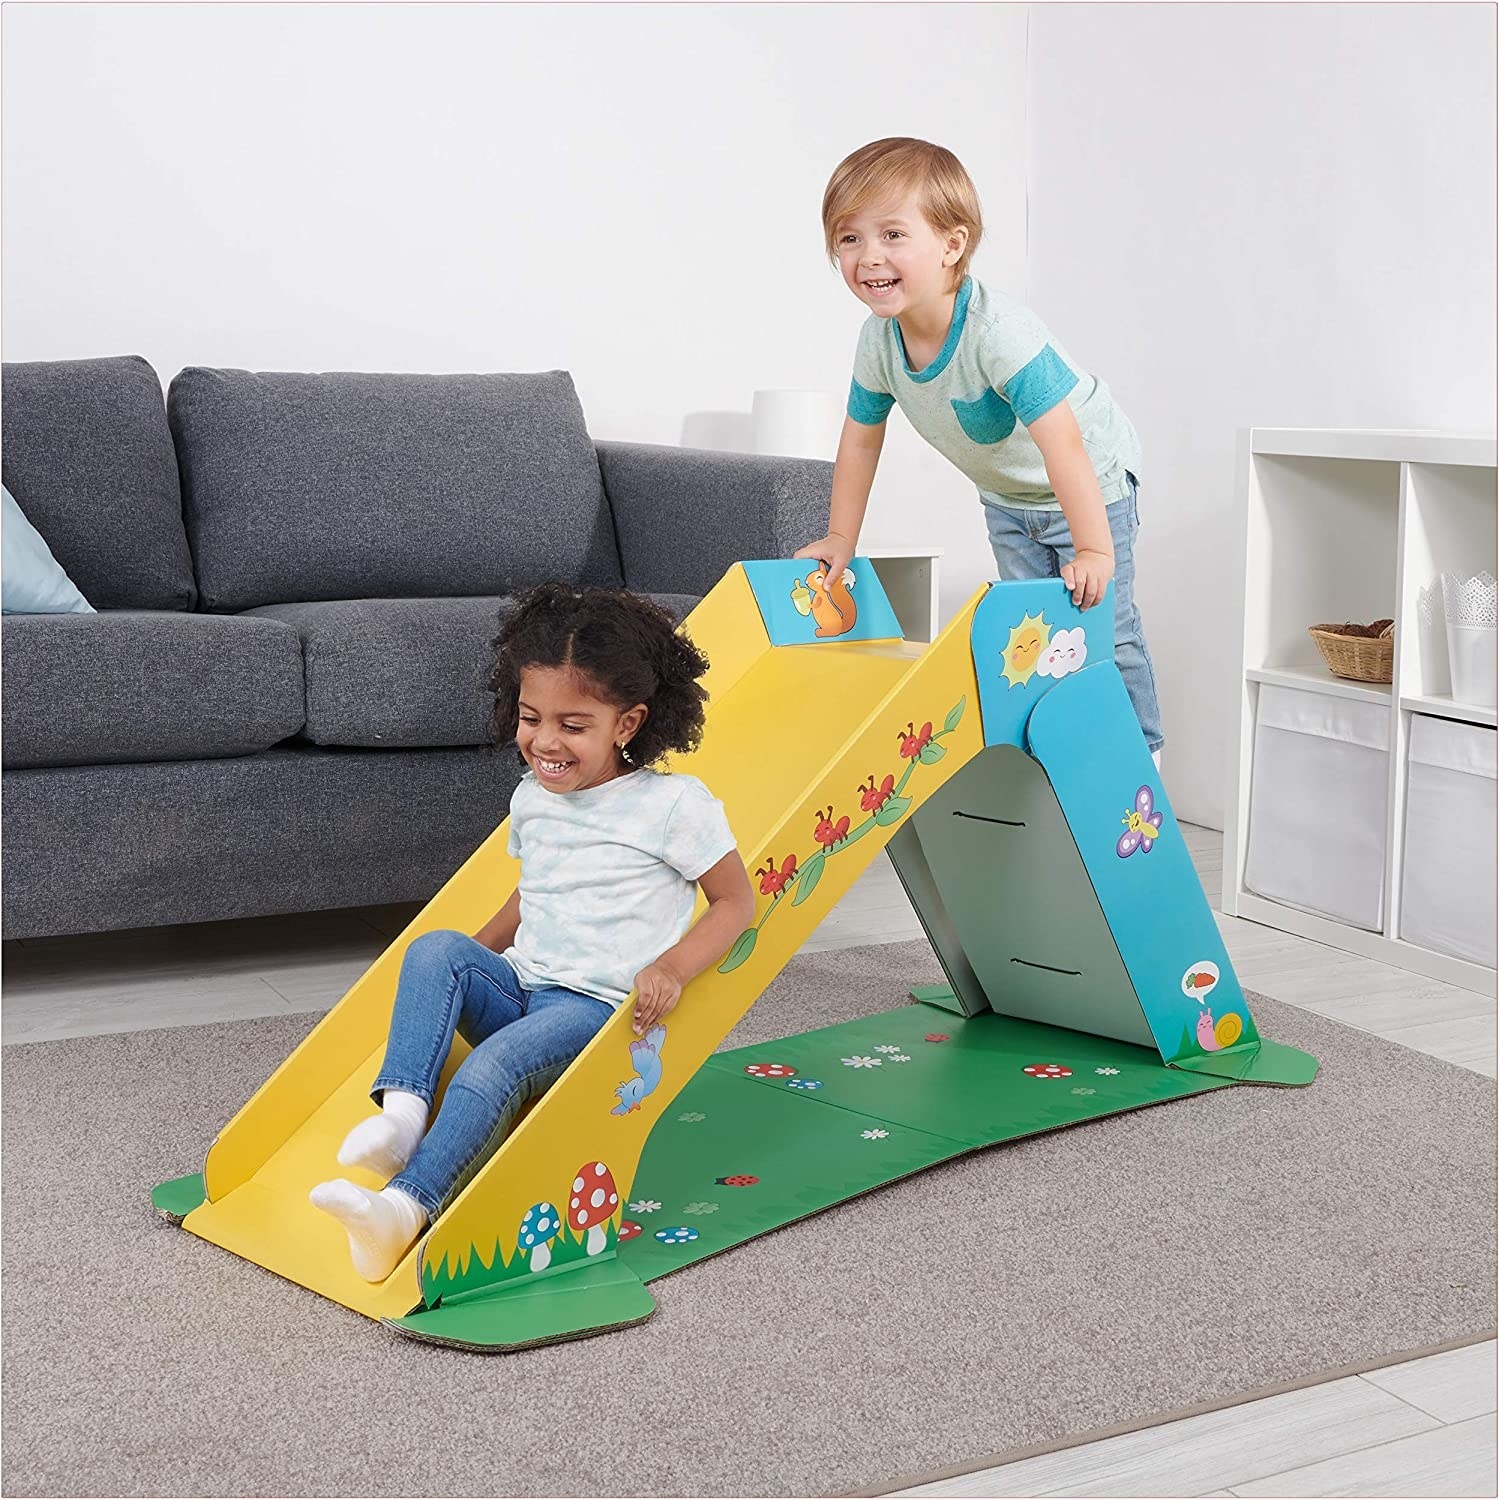 two toddlers playing on indoor cardboard slide